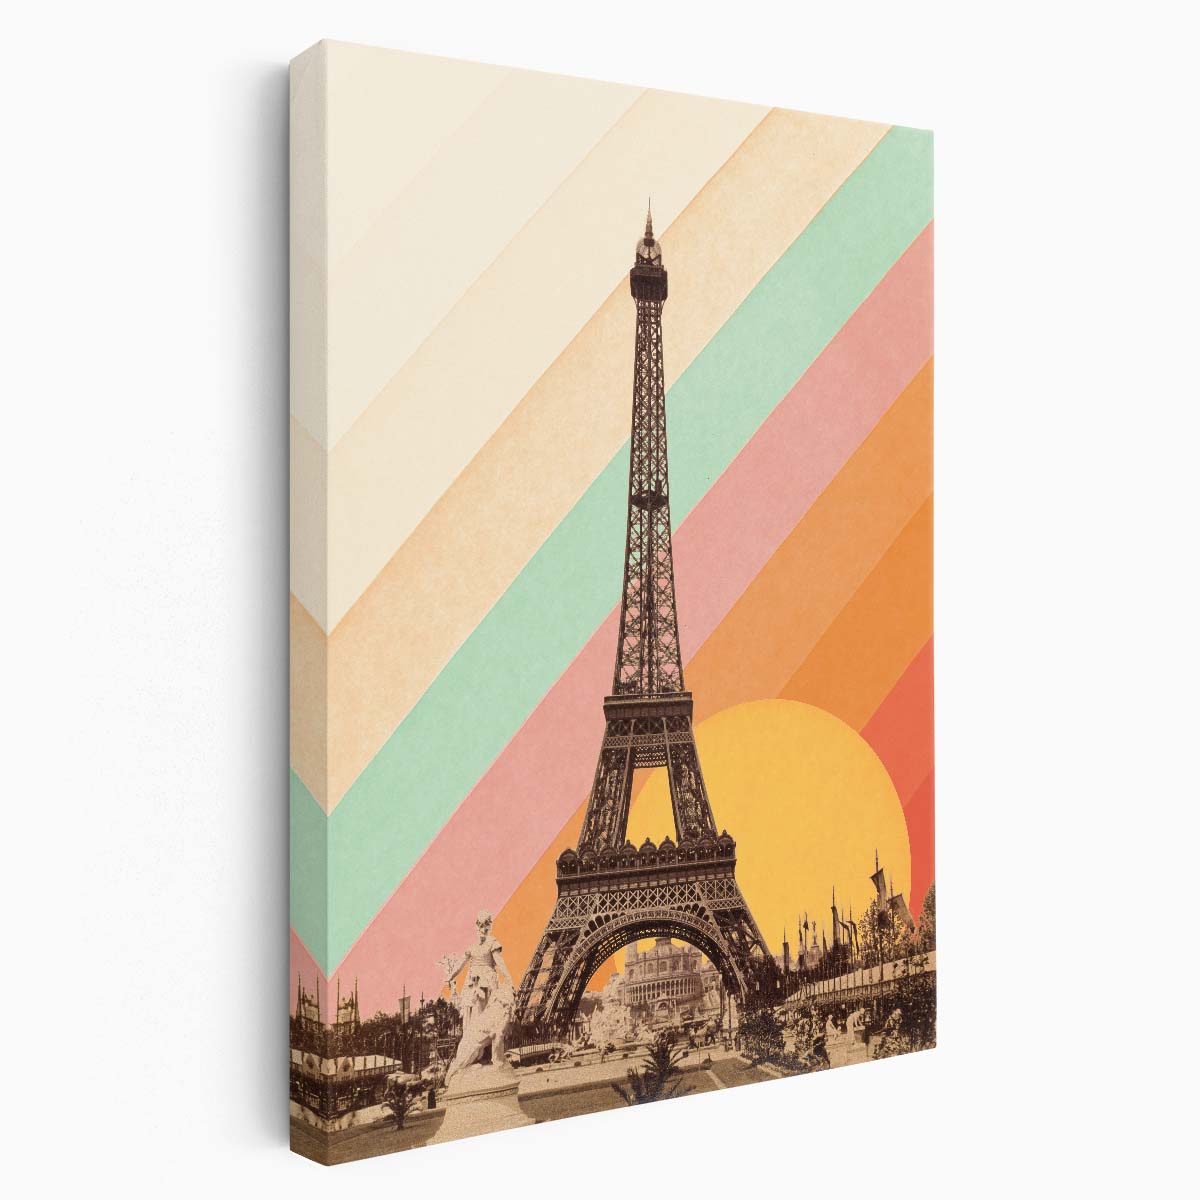 Parisian Eiffel Tower Illustration with Rainbow Colors by Florent Bodart by Luxuriance Designs, made in USA